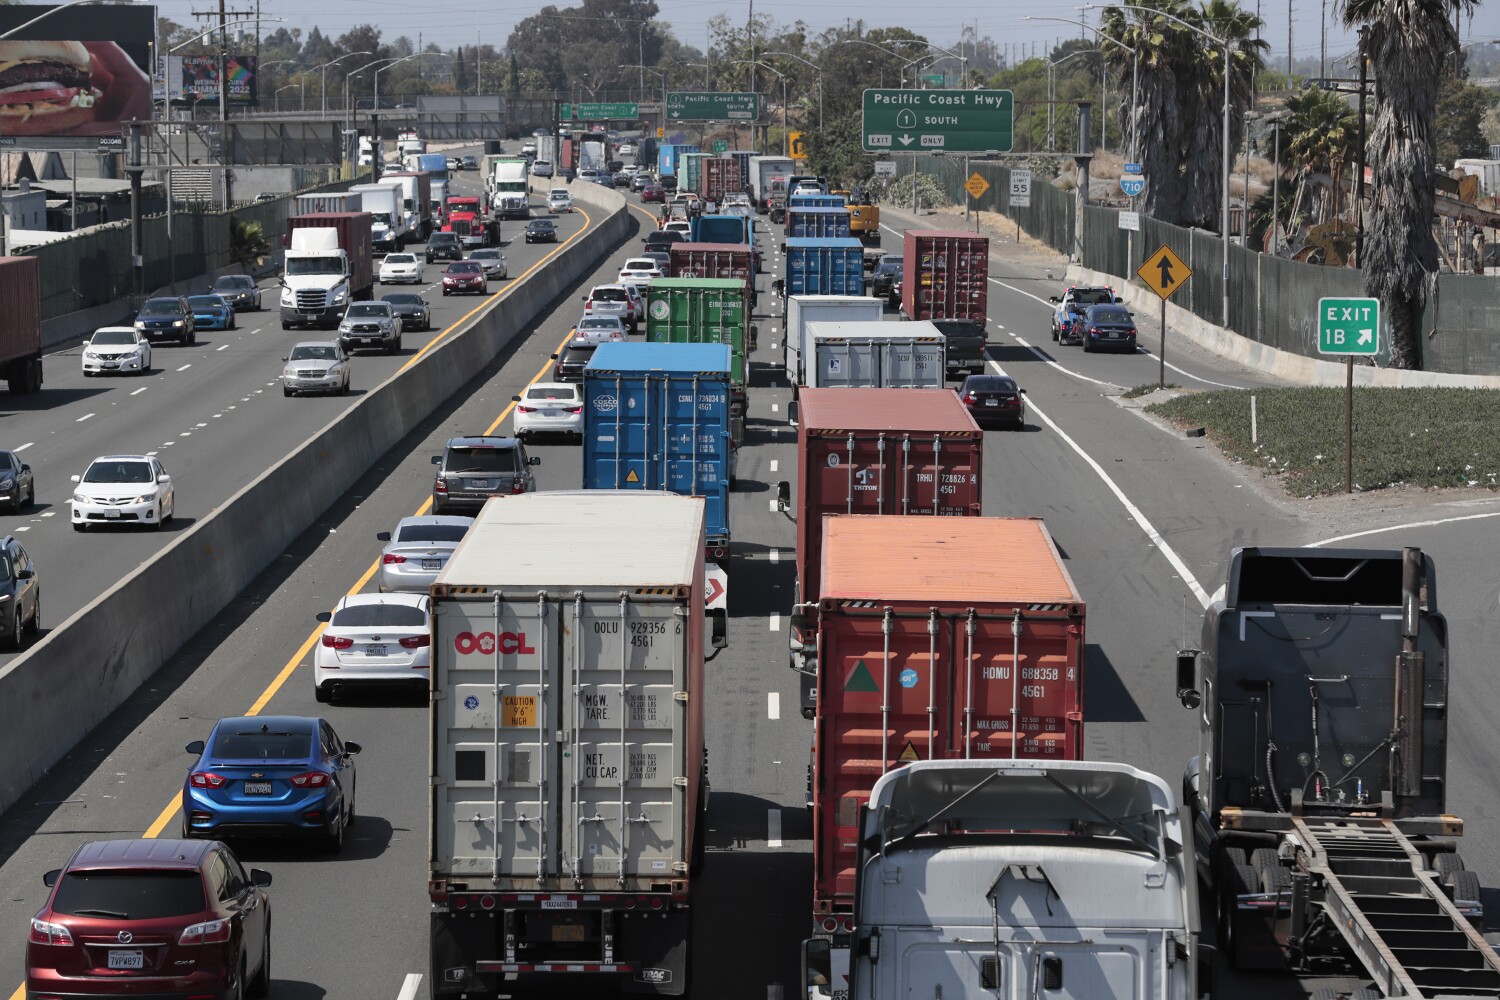 A bid to stop freeway expansions in California hits a roadblock: Organized labor